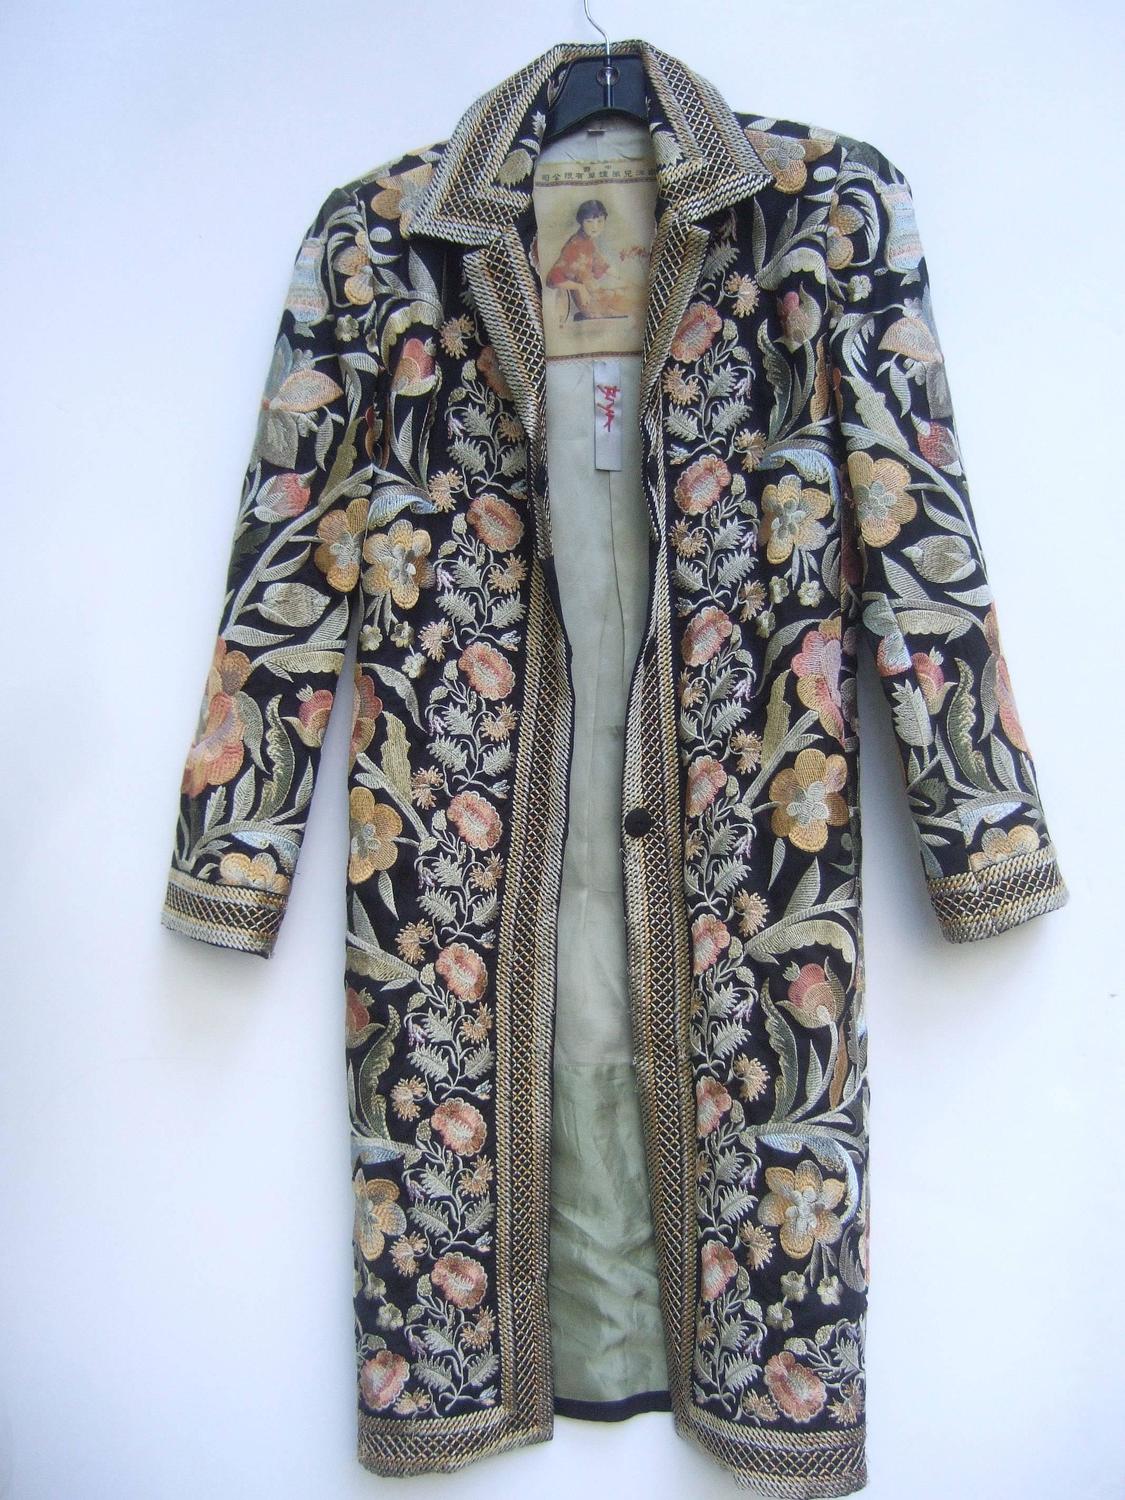 Extravagant Flower Embroidered Silk Evening Coat For Sale at 1stdibs